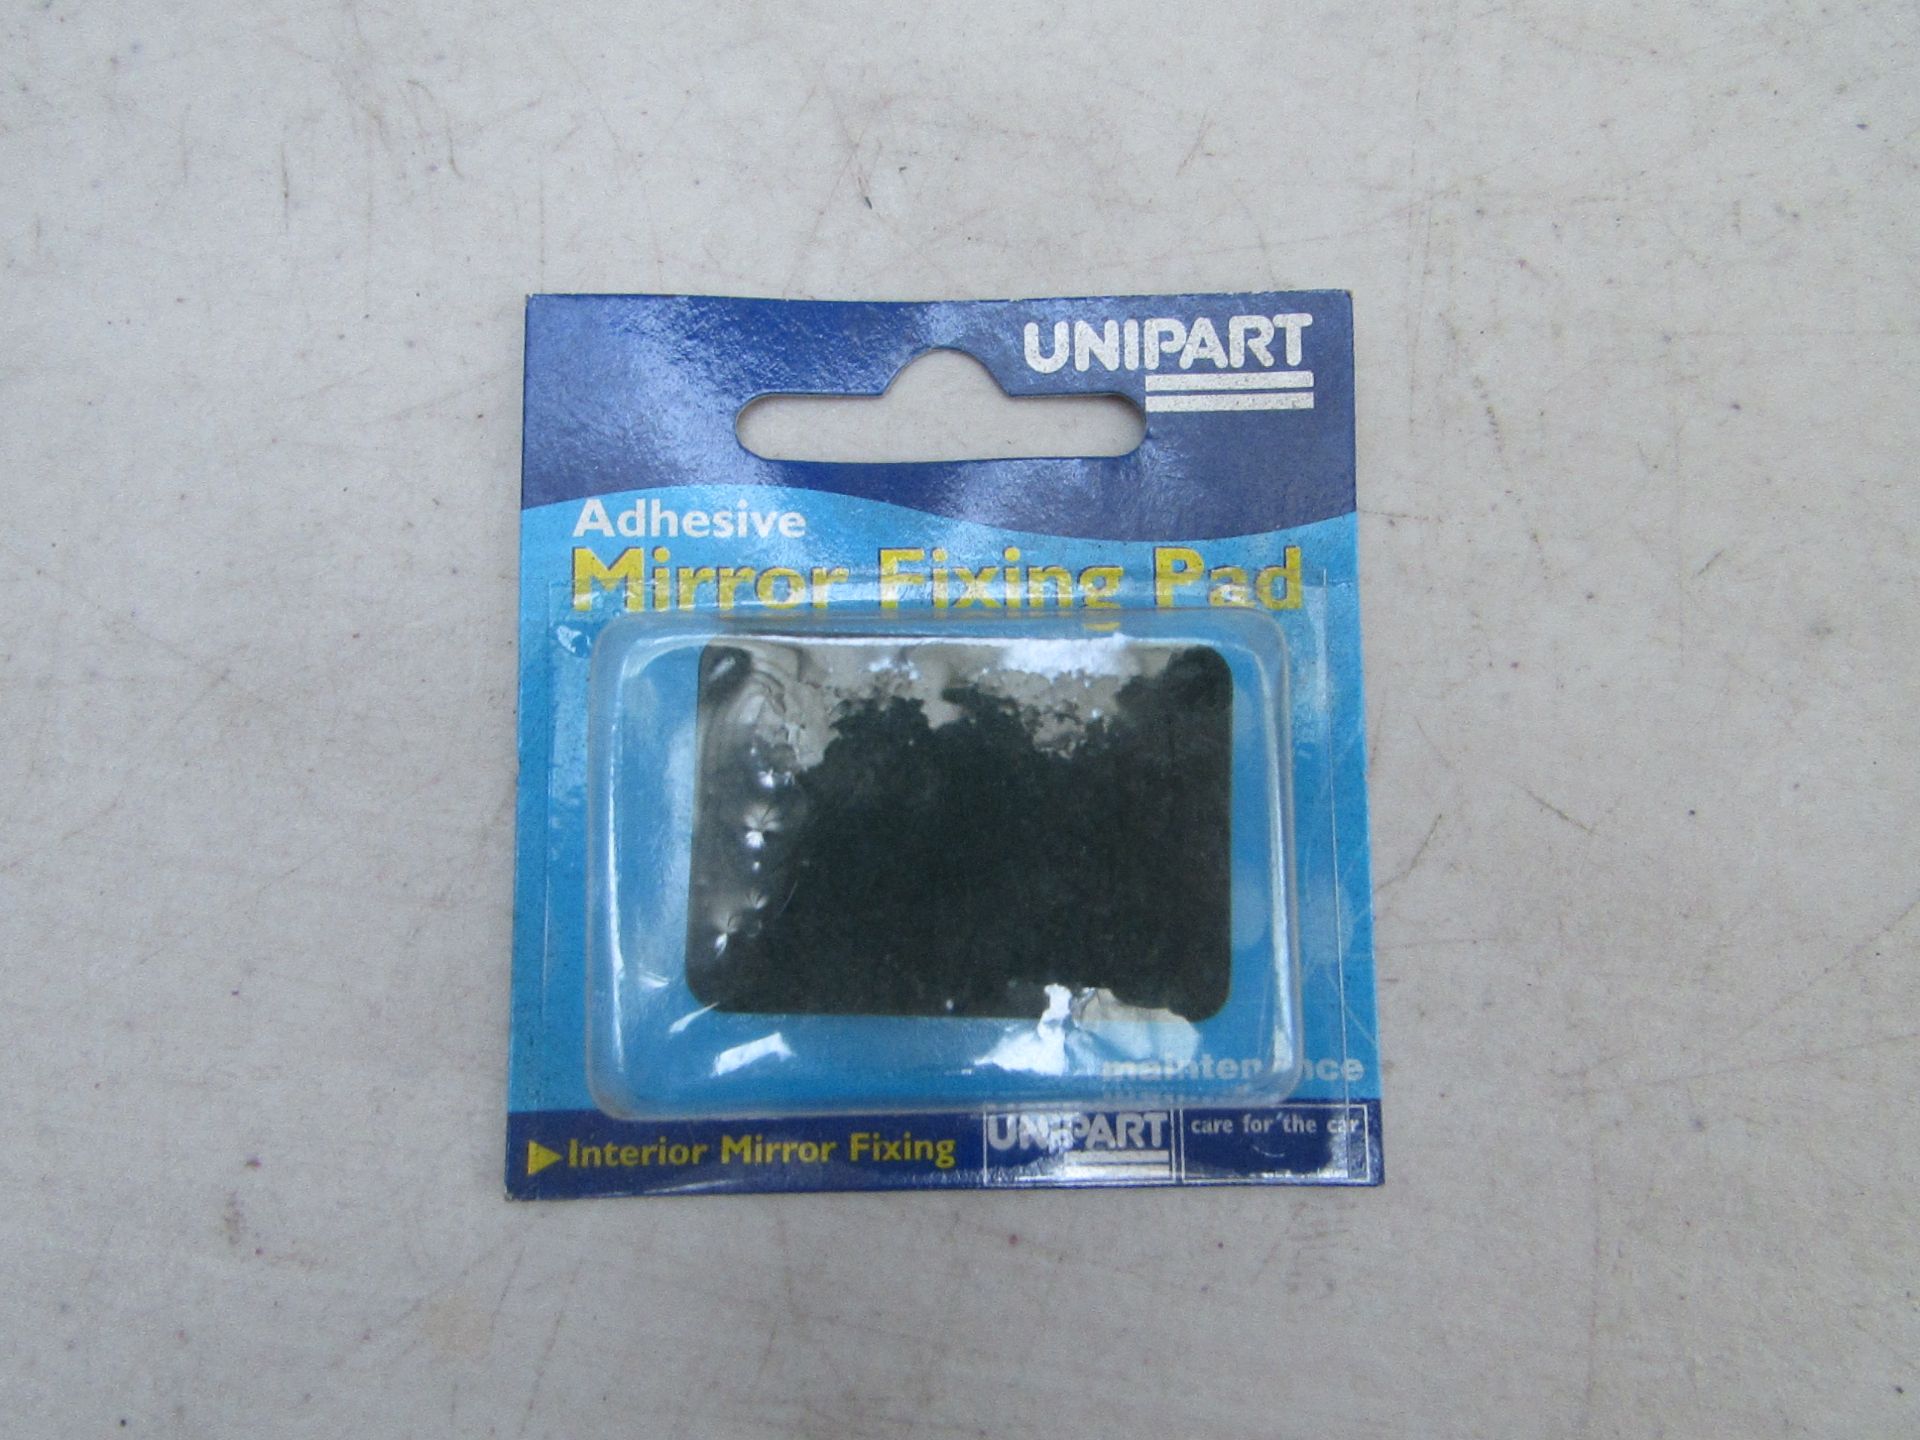 5x Unipart Adhesive mirror fixing pad, all unchecked and in packaging